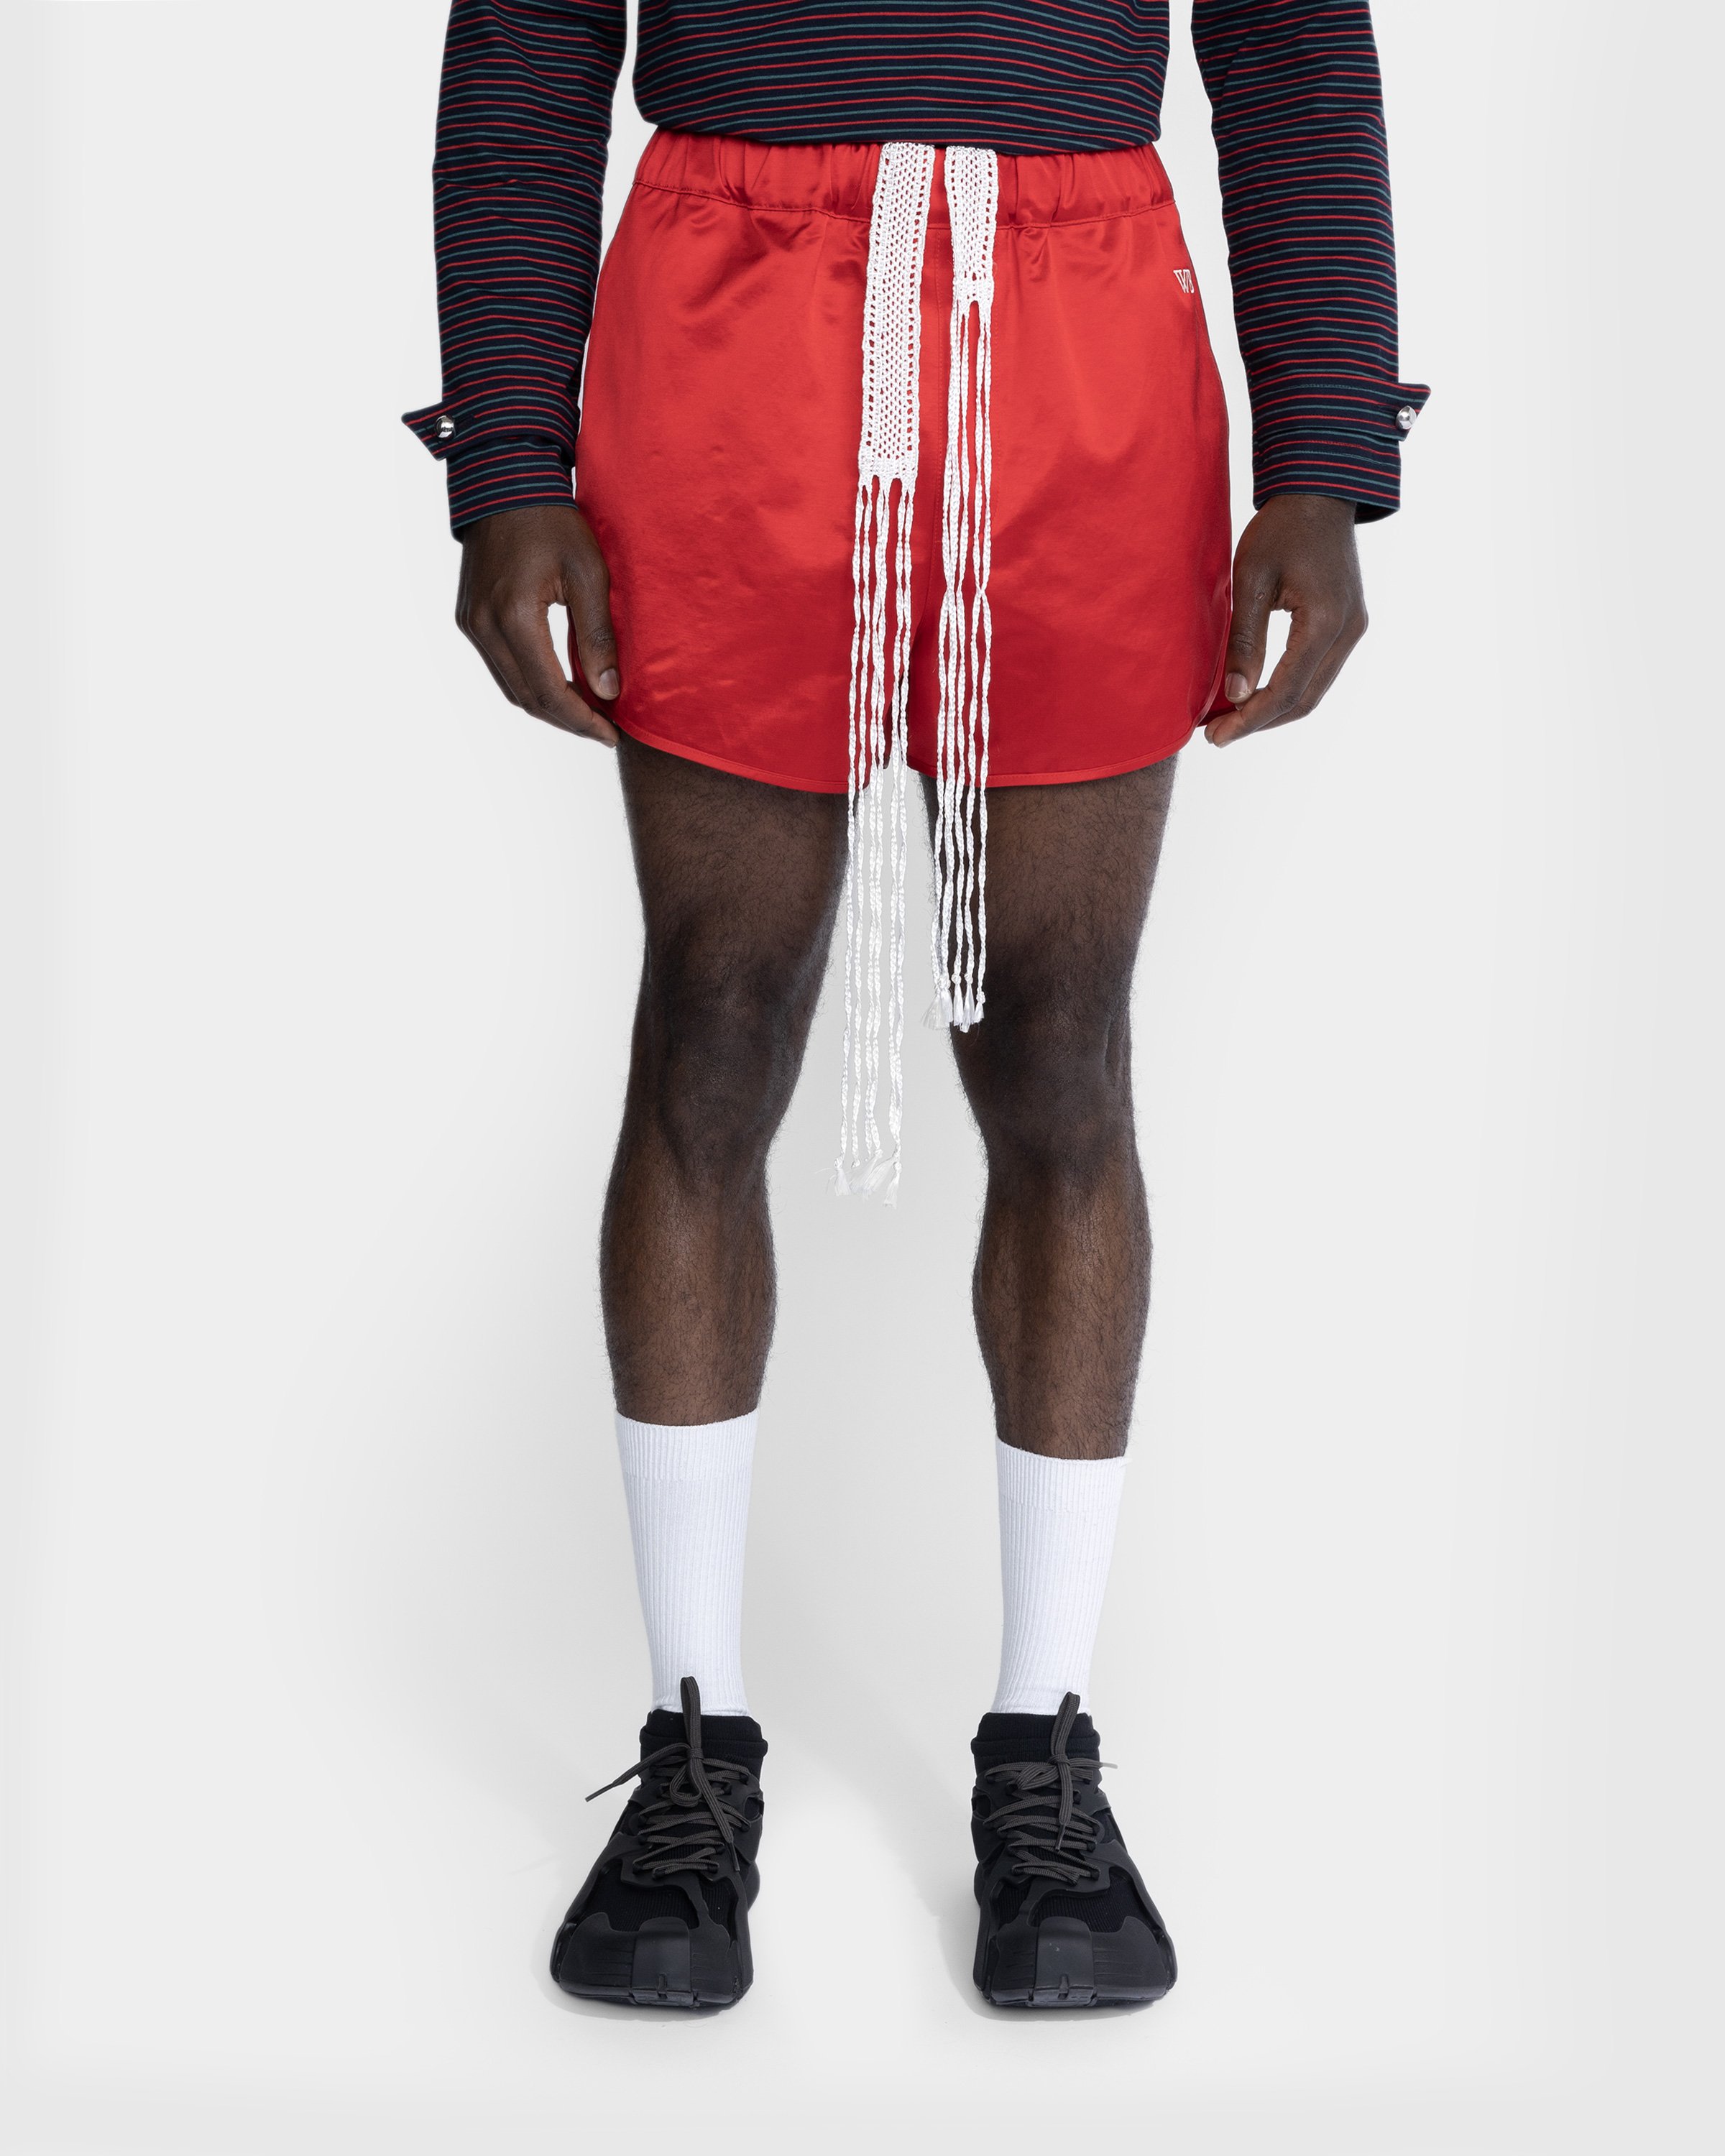 Wales Bonner - Cassette Shorts - Clothing - Red - Image 2